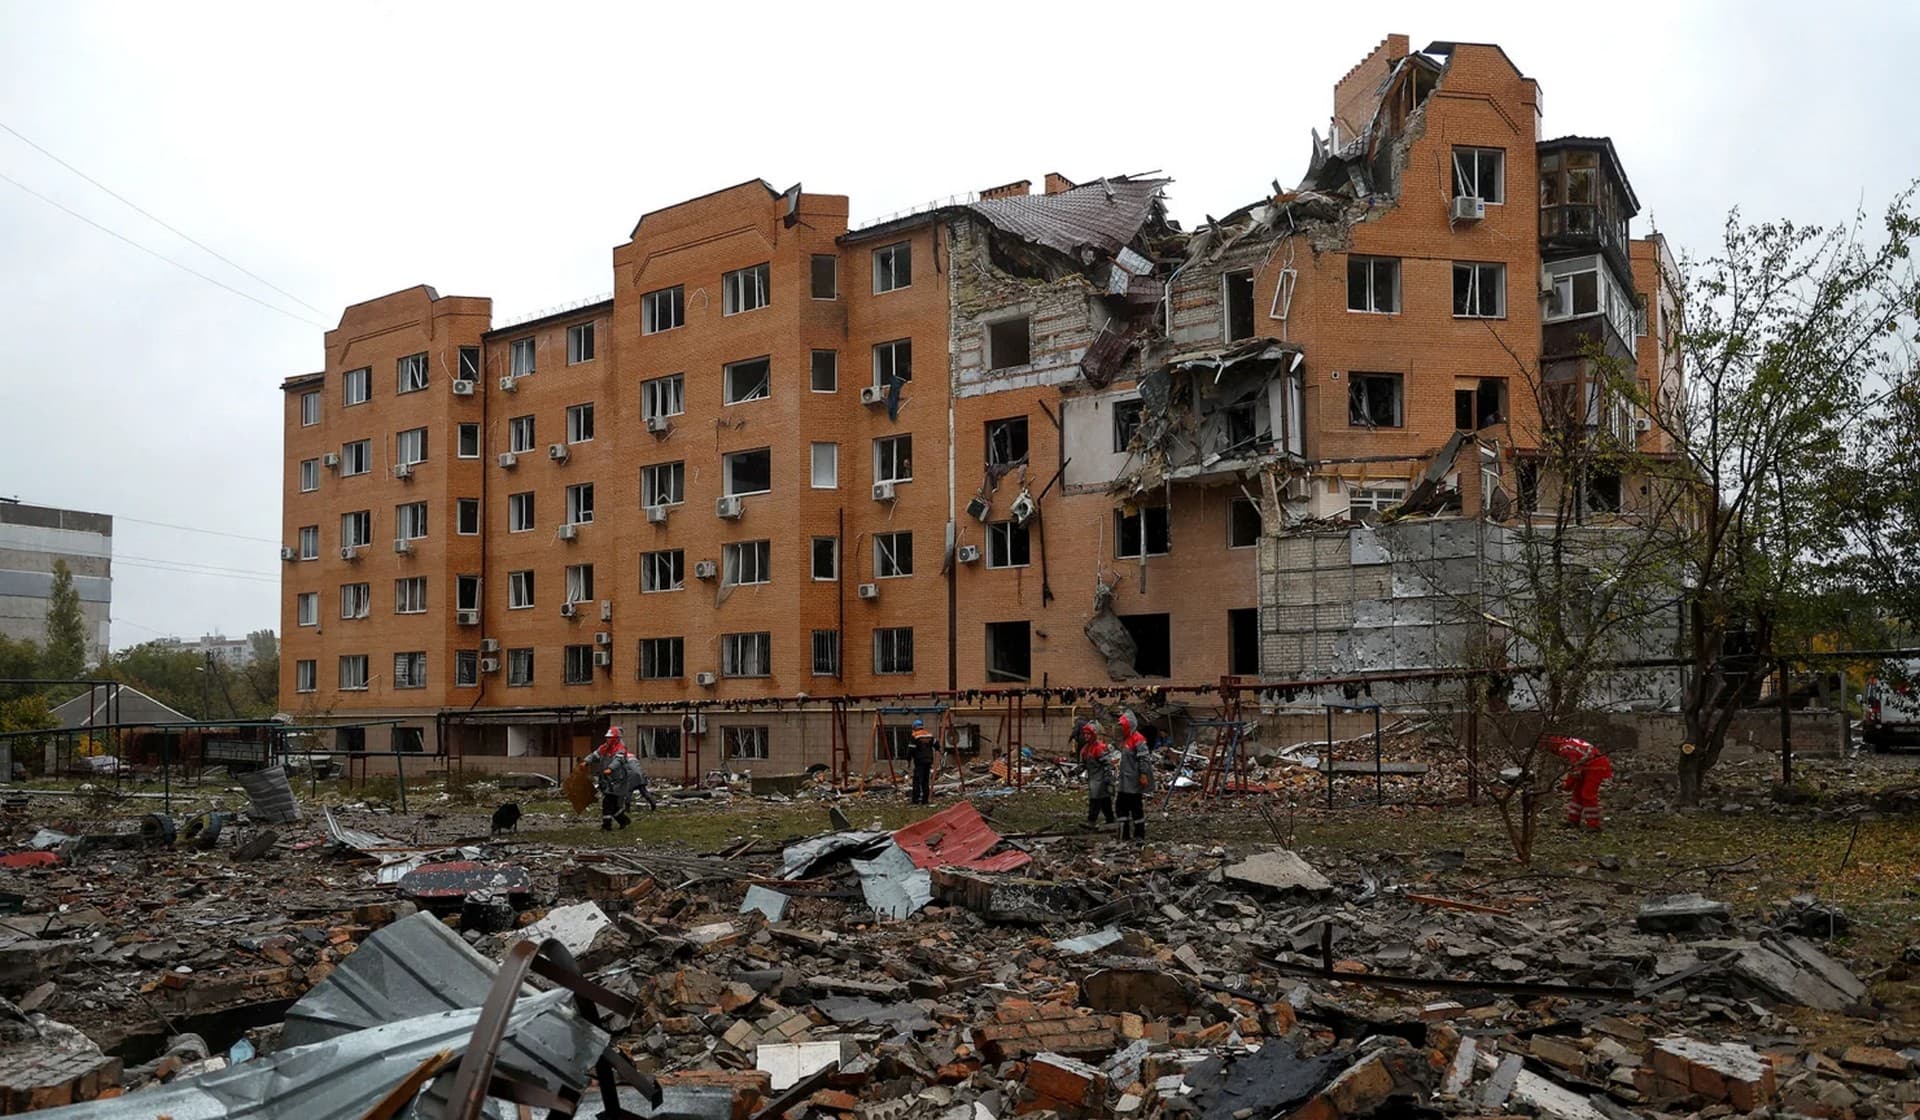 A residential building heavily damaged by a Russian missile attack in Mykolaiv